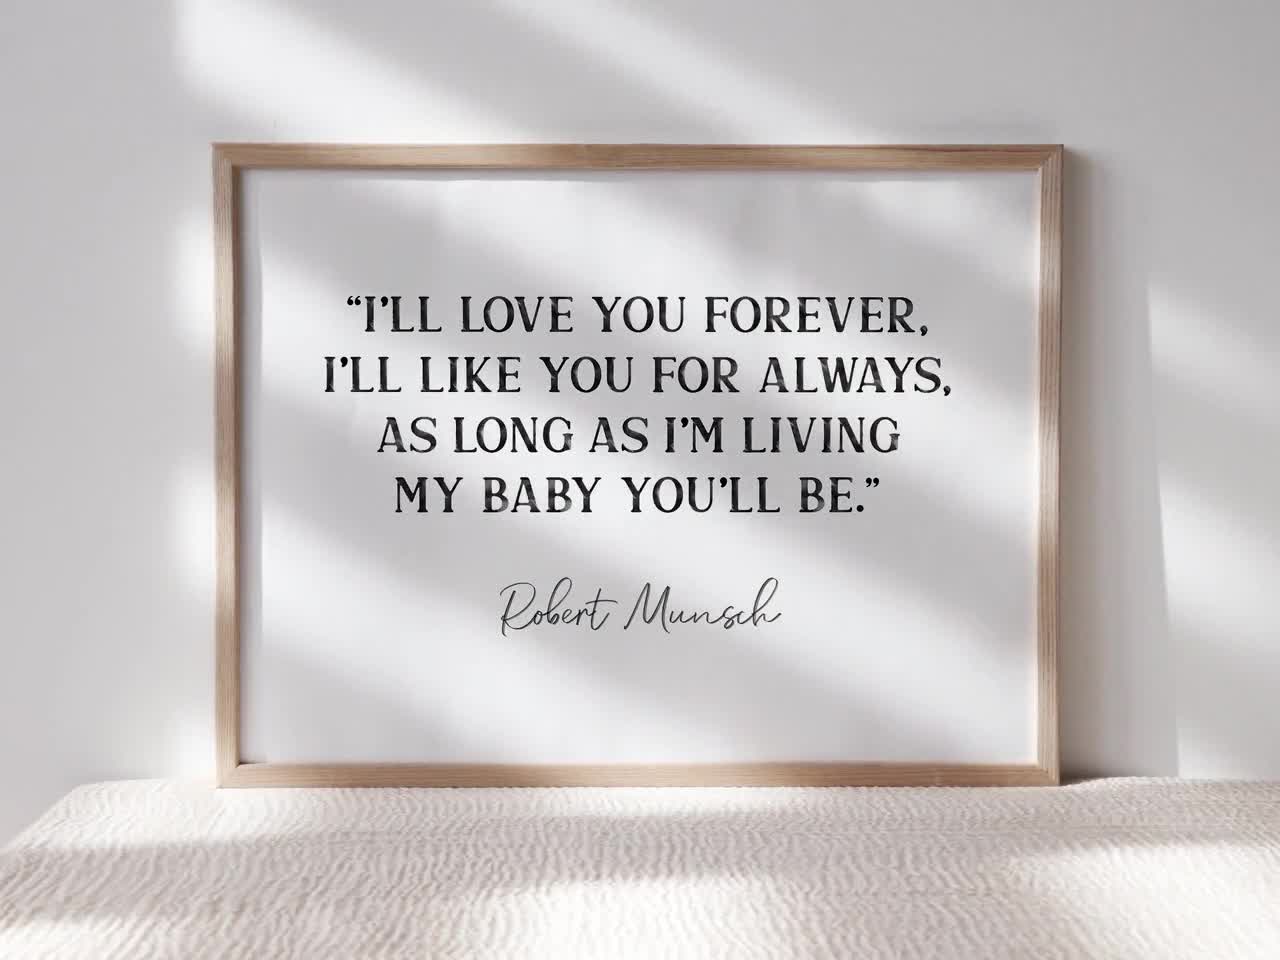 Love You Forever Book Quotes I'll Love You Forever - Etsy 日本